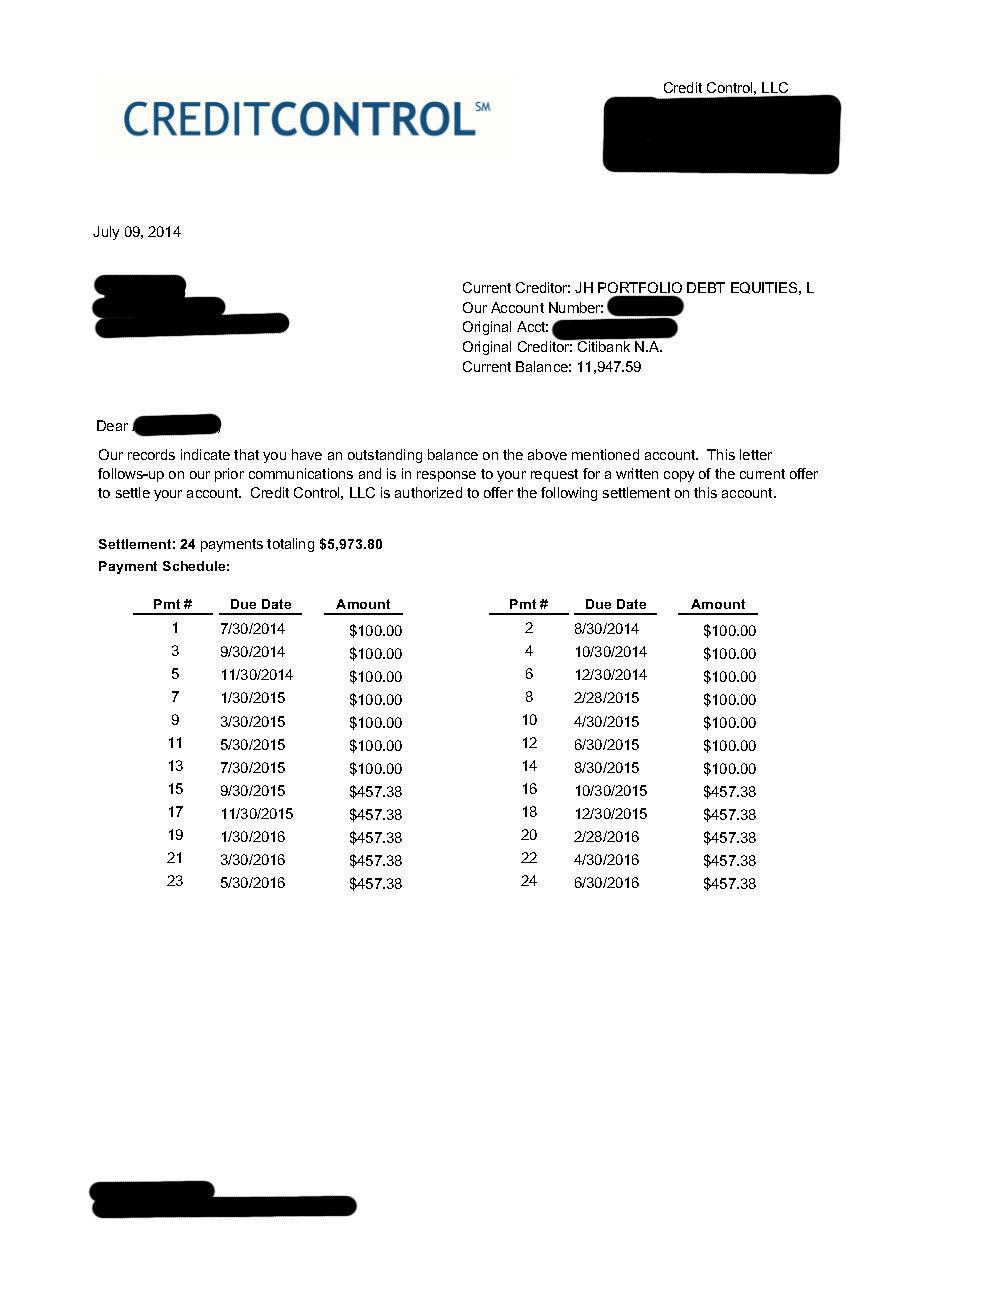 Client AG2 from CA saved $4,687